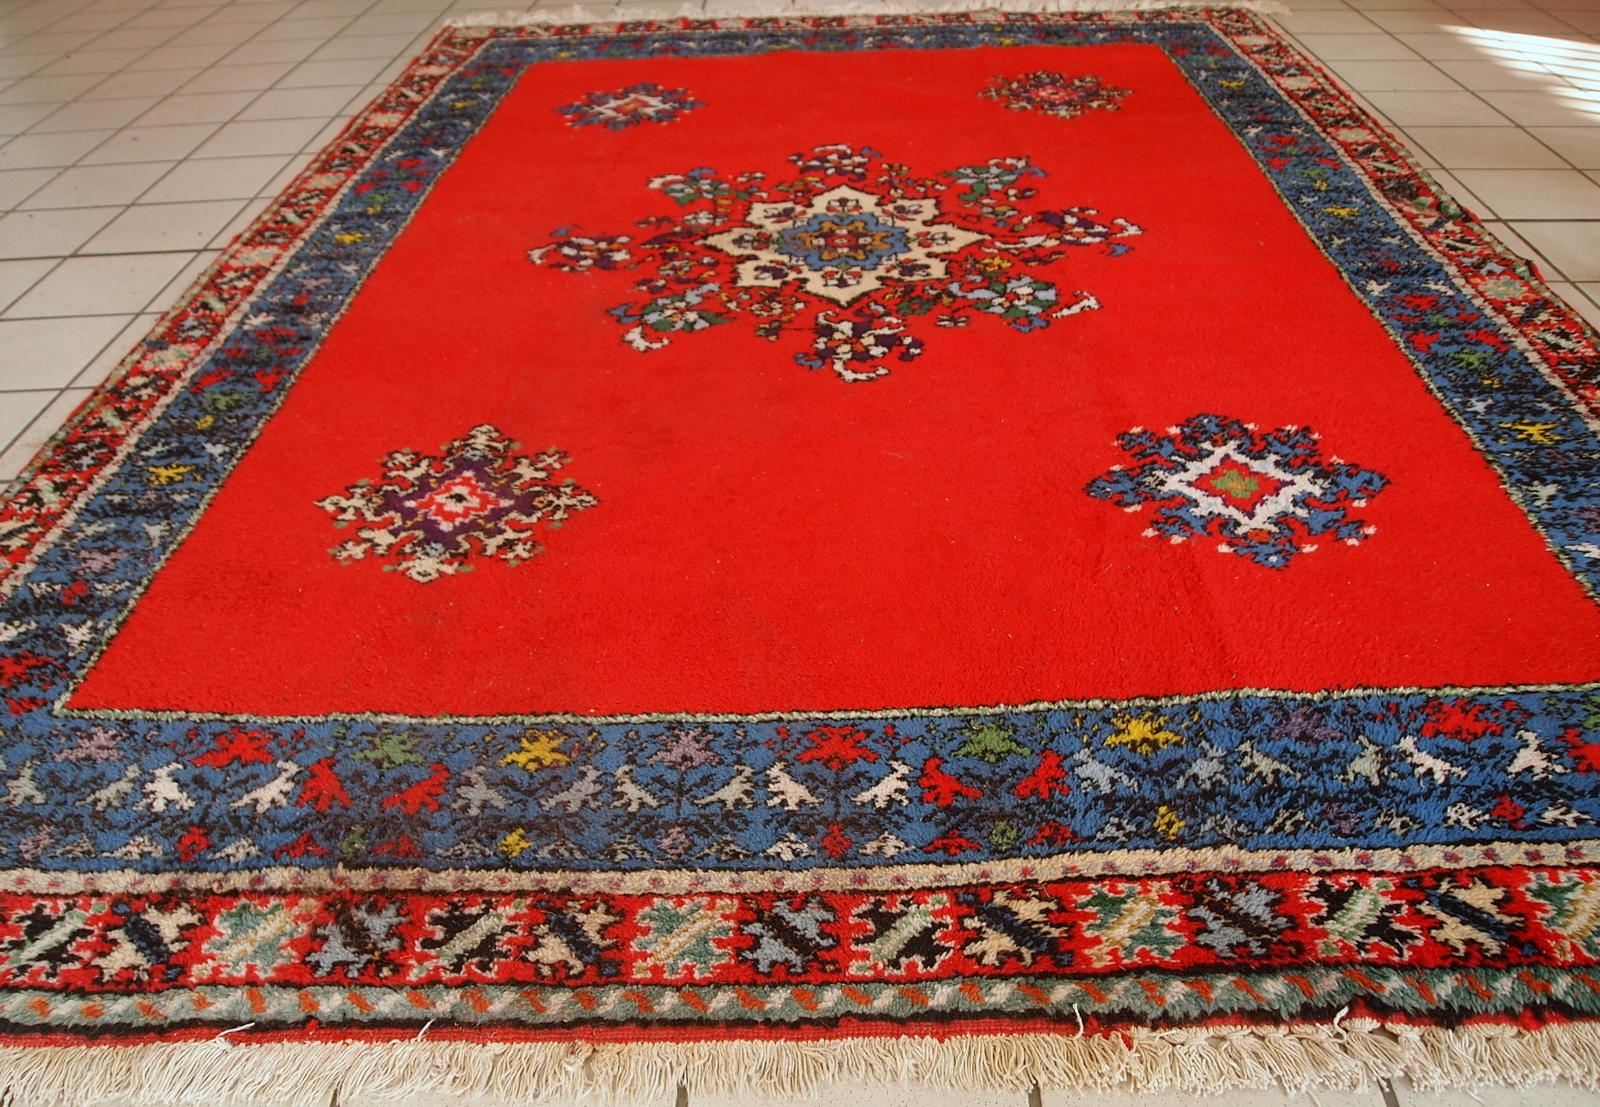 Handmade vintage rug from Berber in Morocco in flashy red wool. The rug is from the end of 20th century in original good condition.

-Condition: original good,

-circa 1970s,

-Size: 5.6' x 7.9' (170cm x 240cm),

-Material: wool,

-Country